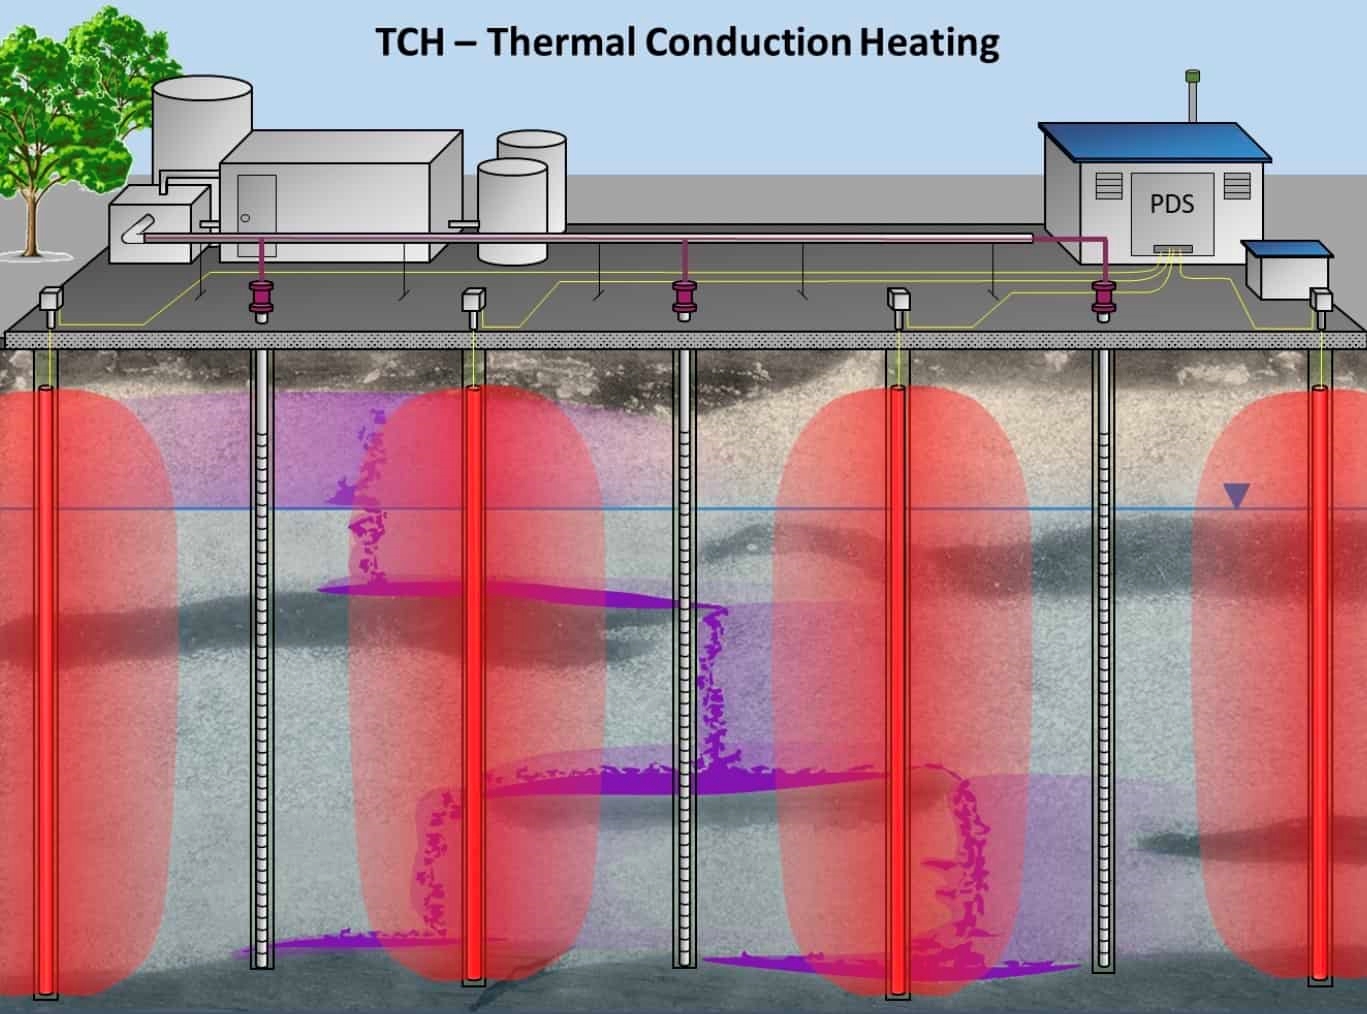 Thermal Conduction Heating (TCH)